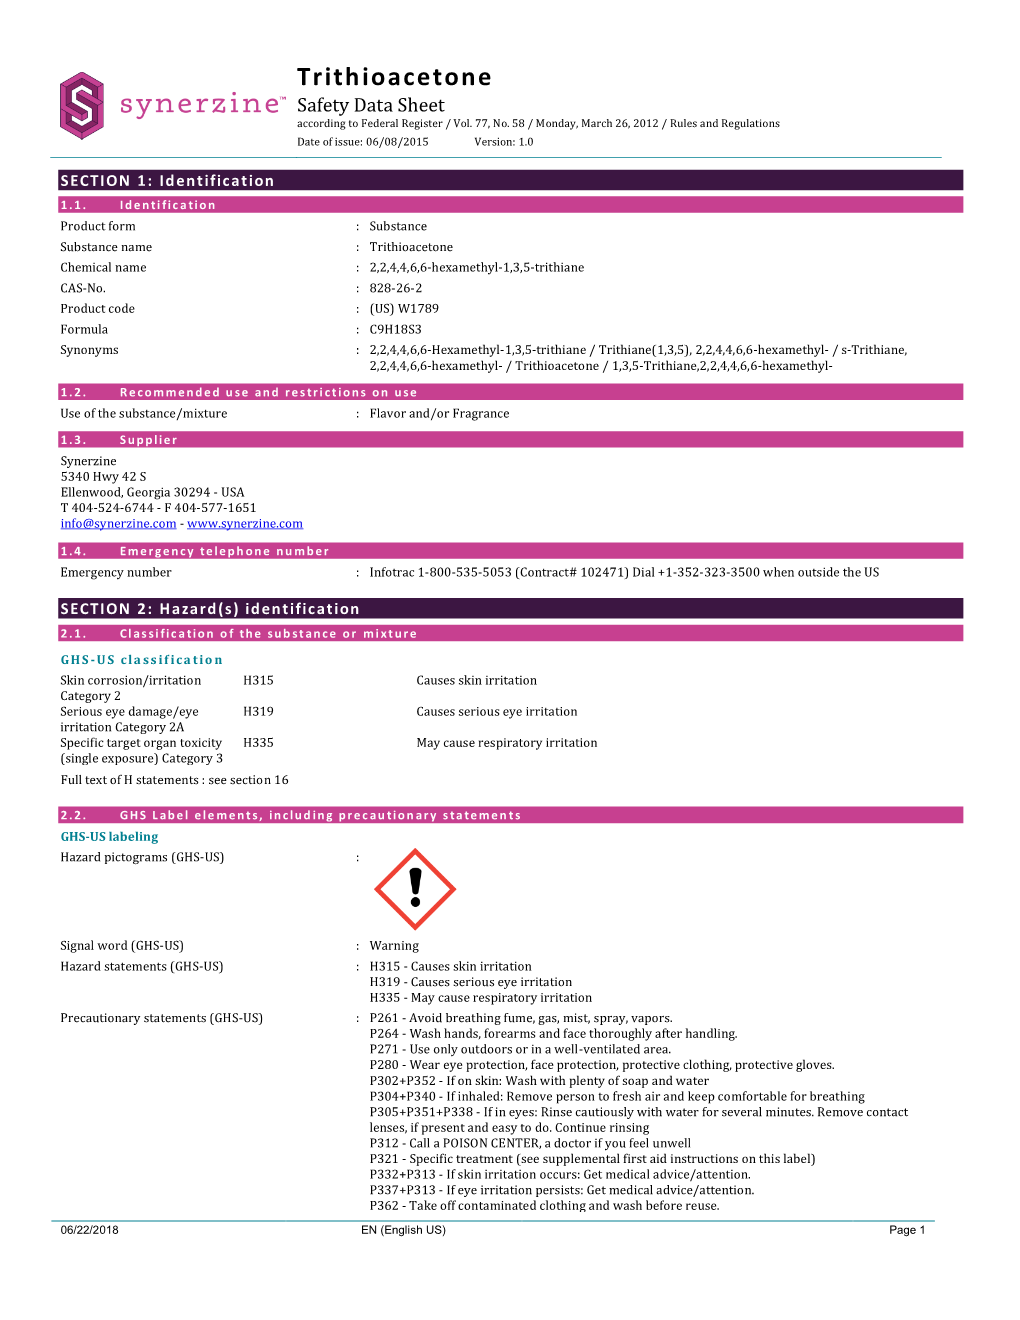 Trithioacetone Safety Data Sheet According to Federal Register / Vol